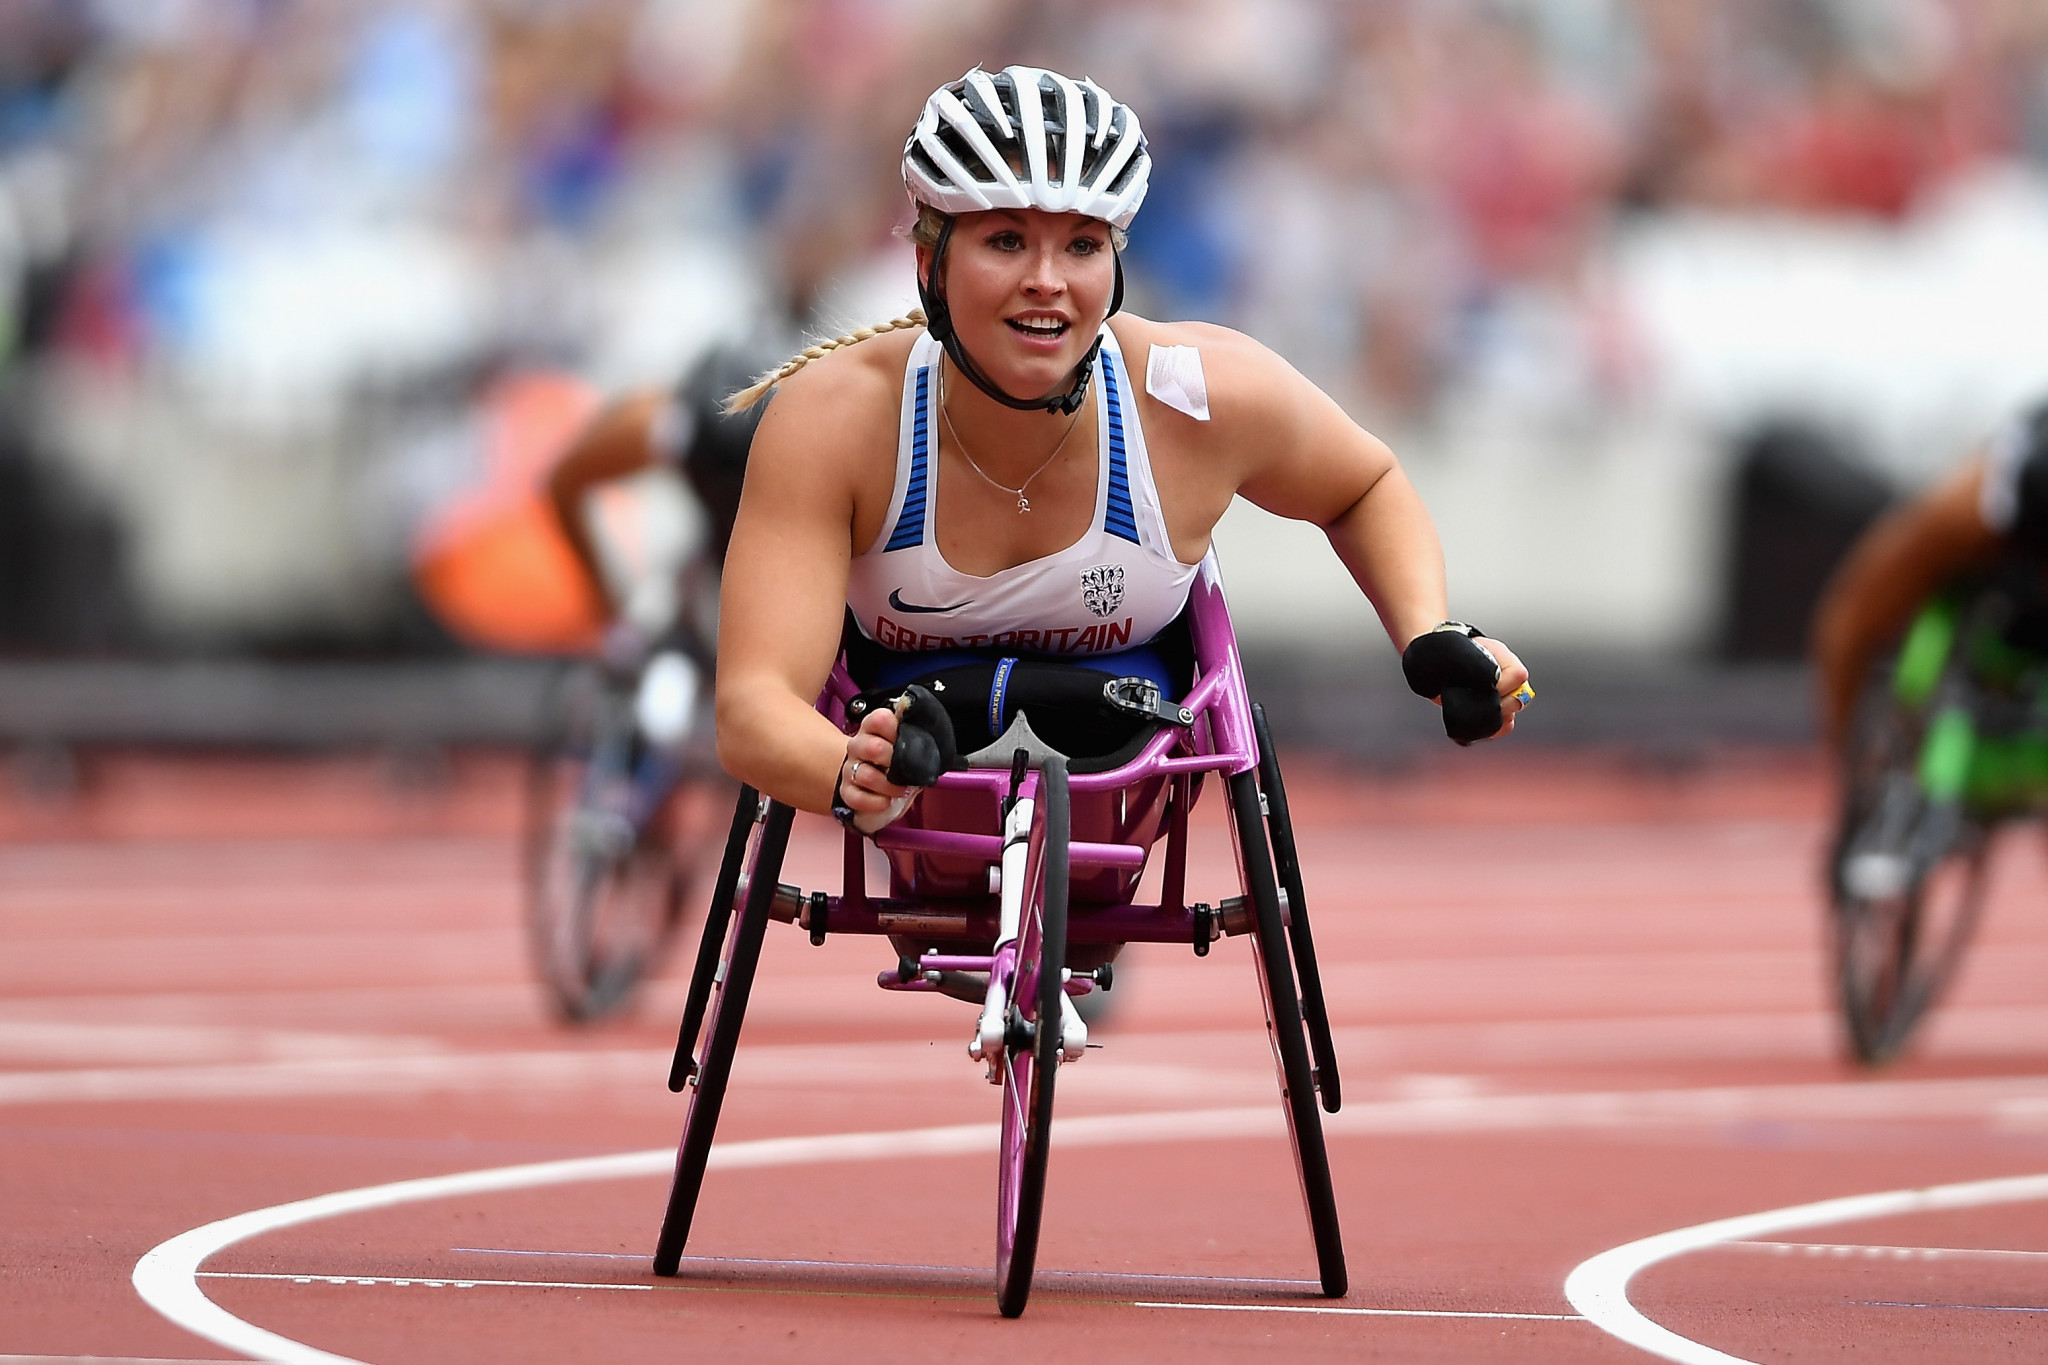 Kinghorn completes hat-trick of victories at World Para Athletics Grand Prix